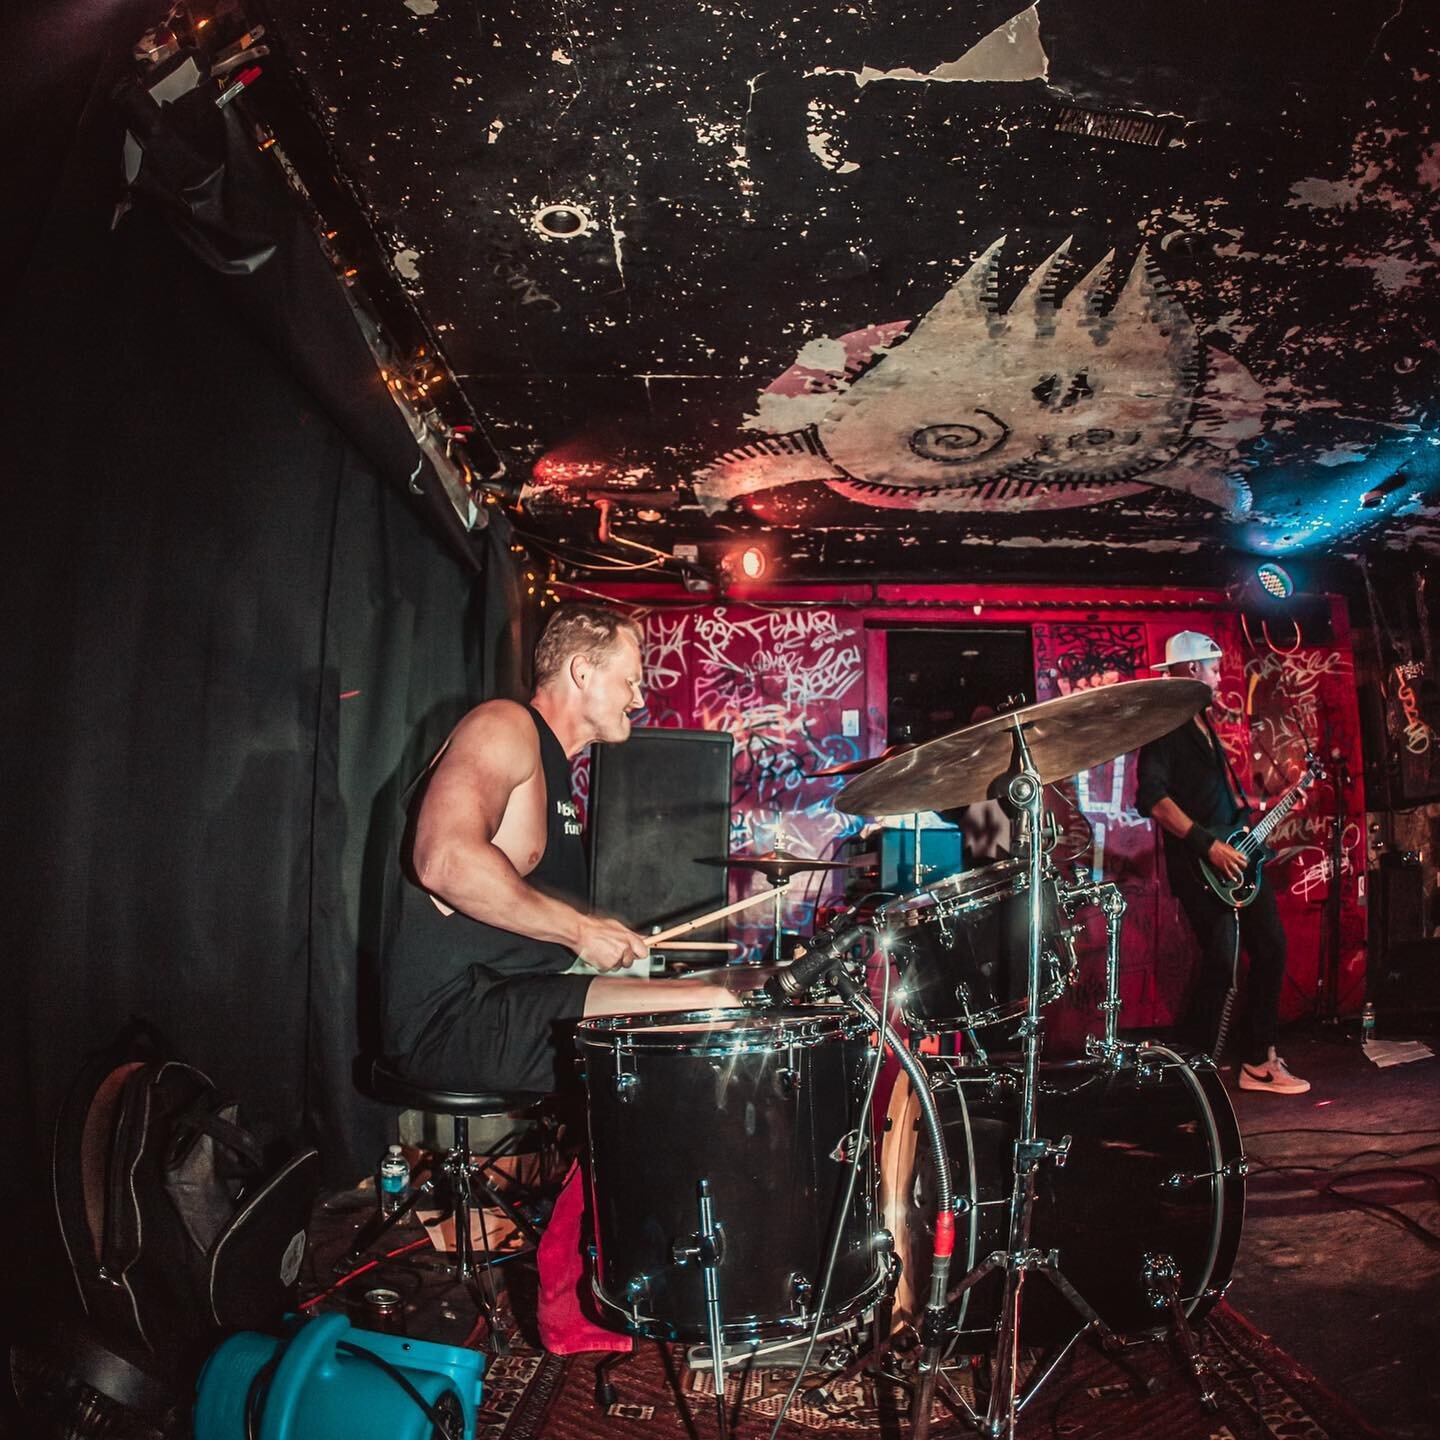 Sick shot from @thesneakydees with @callthewolf, 7/22/22. Photo cred to @carlyboomer 💰
&bull;
&bull;
&bull;
#drums #drummer #drum #drumlife #drumfam #instadrums #instadrummer #gig #concert #live #livemusic #band #venue #work #grind #hustle #rock #ro